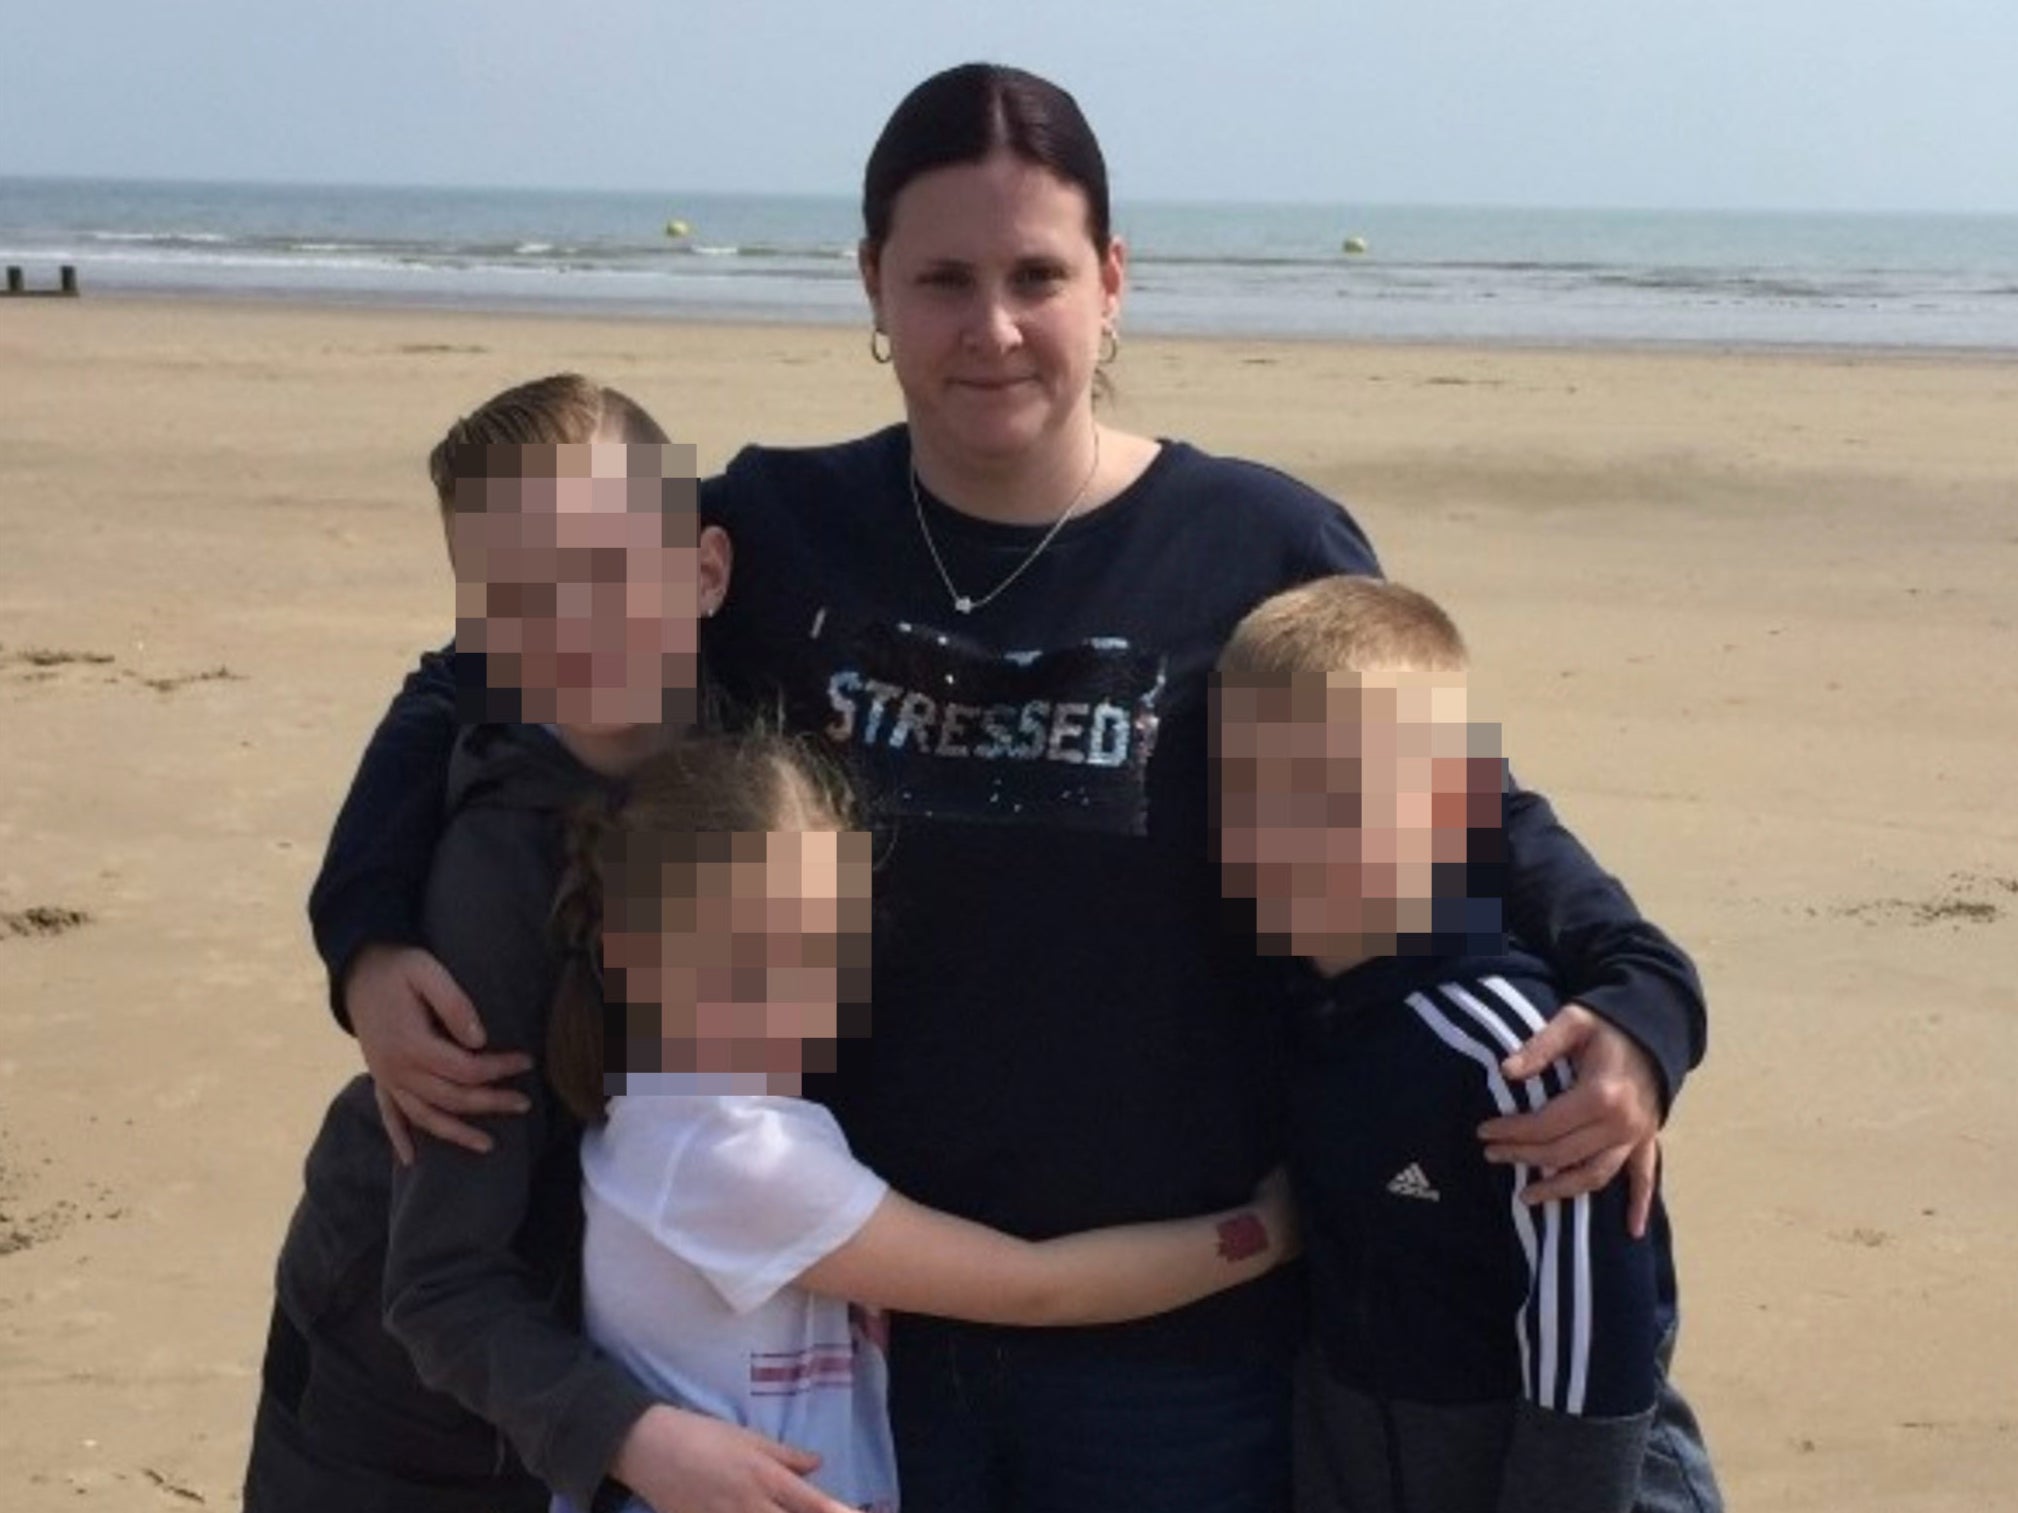 Goodwin, pictured, used £2,000 worth of donations raised via JustGiving to go on holiday to the US with her children